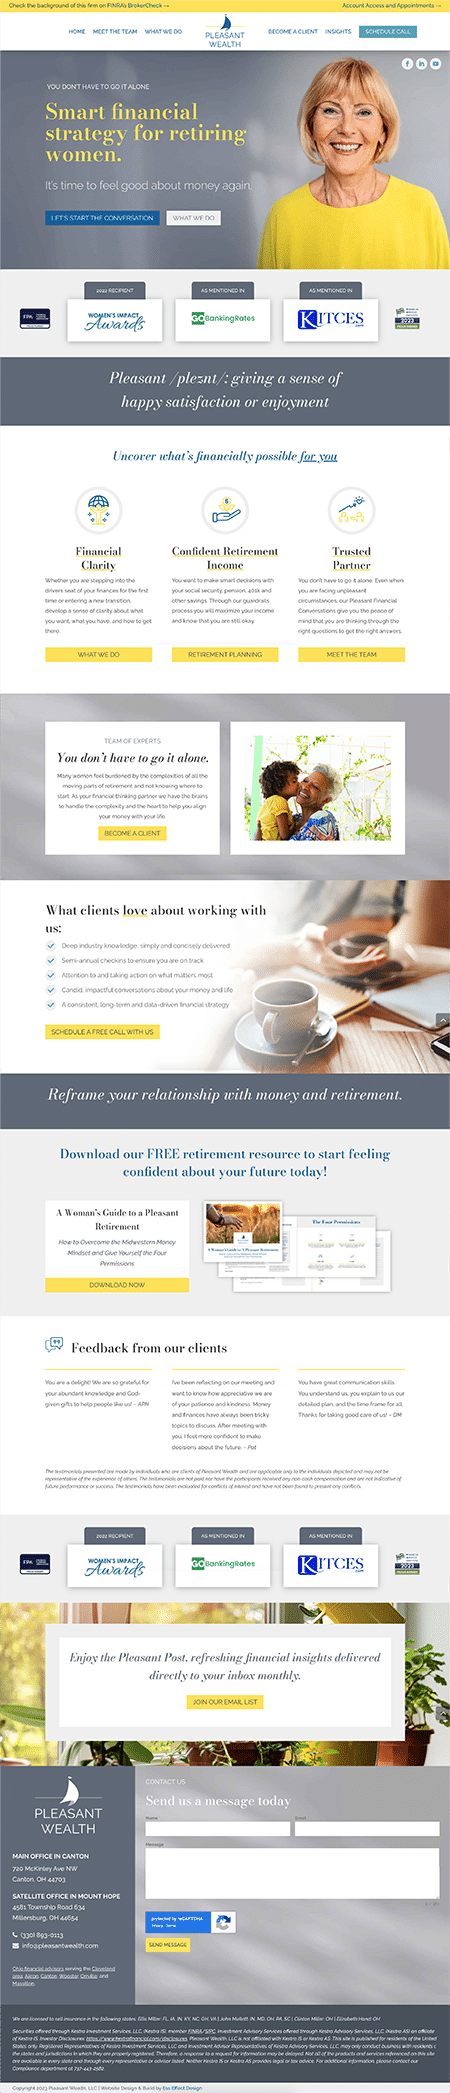 Website design and layout for the homepage of financial site for Pleasant Wealth